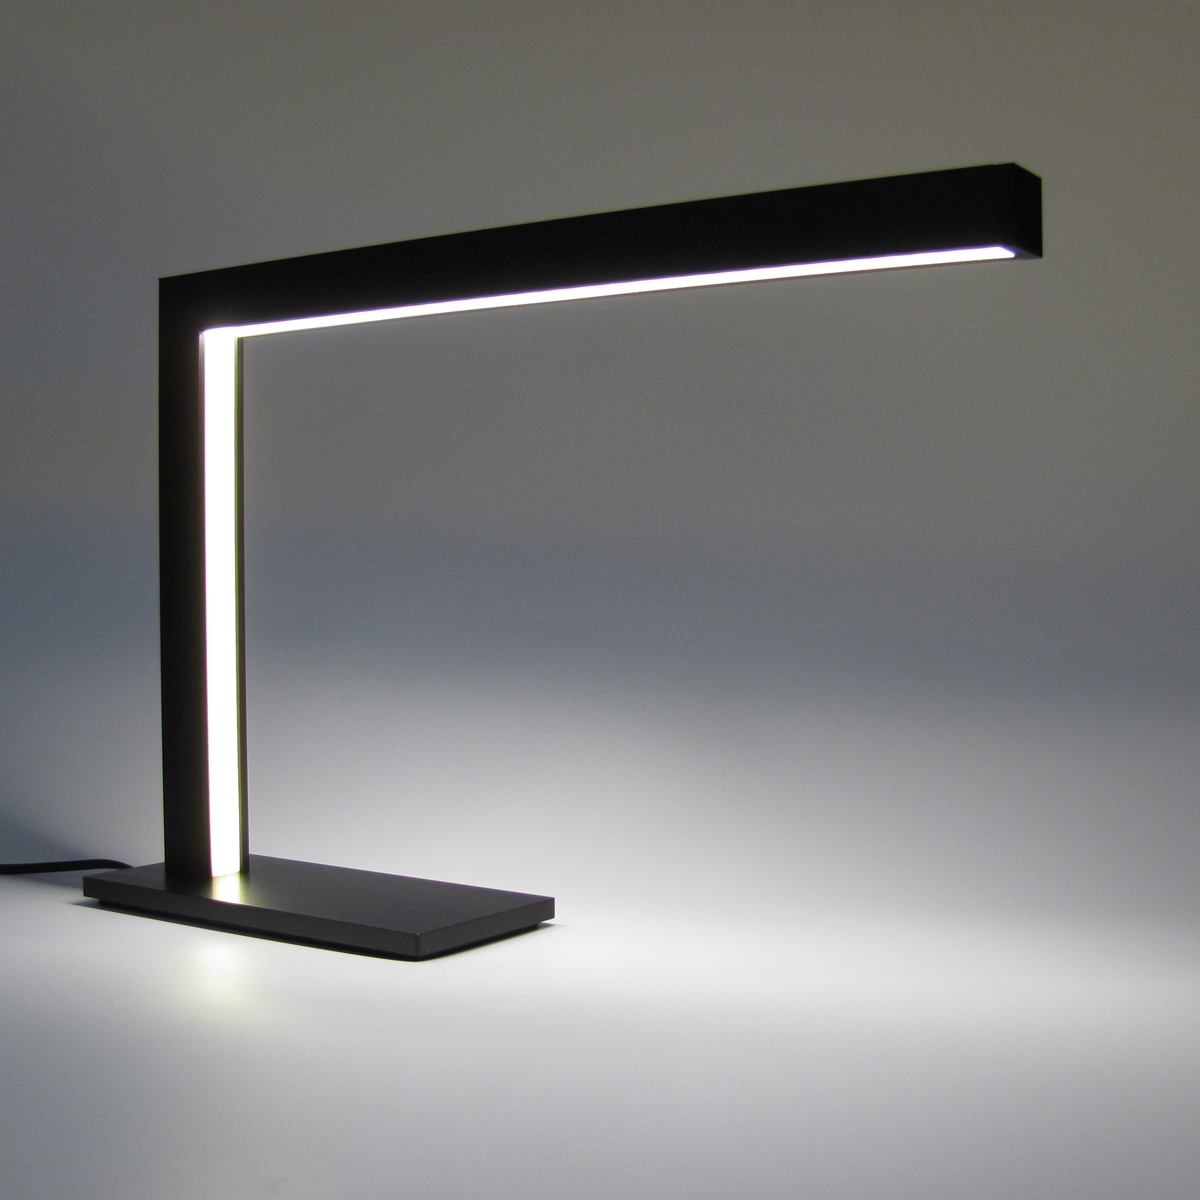 Led desk lamps - making you protected from stress and strain | Warisan